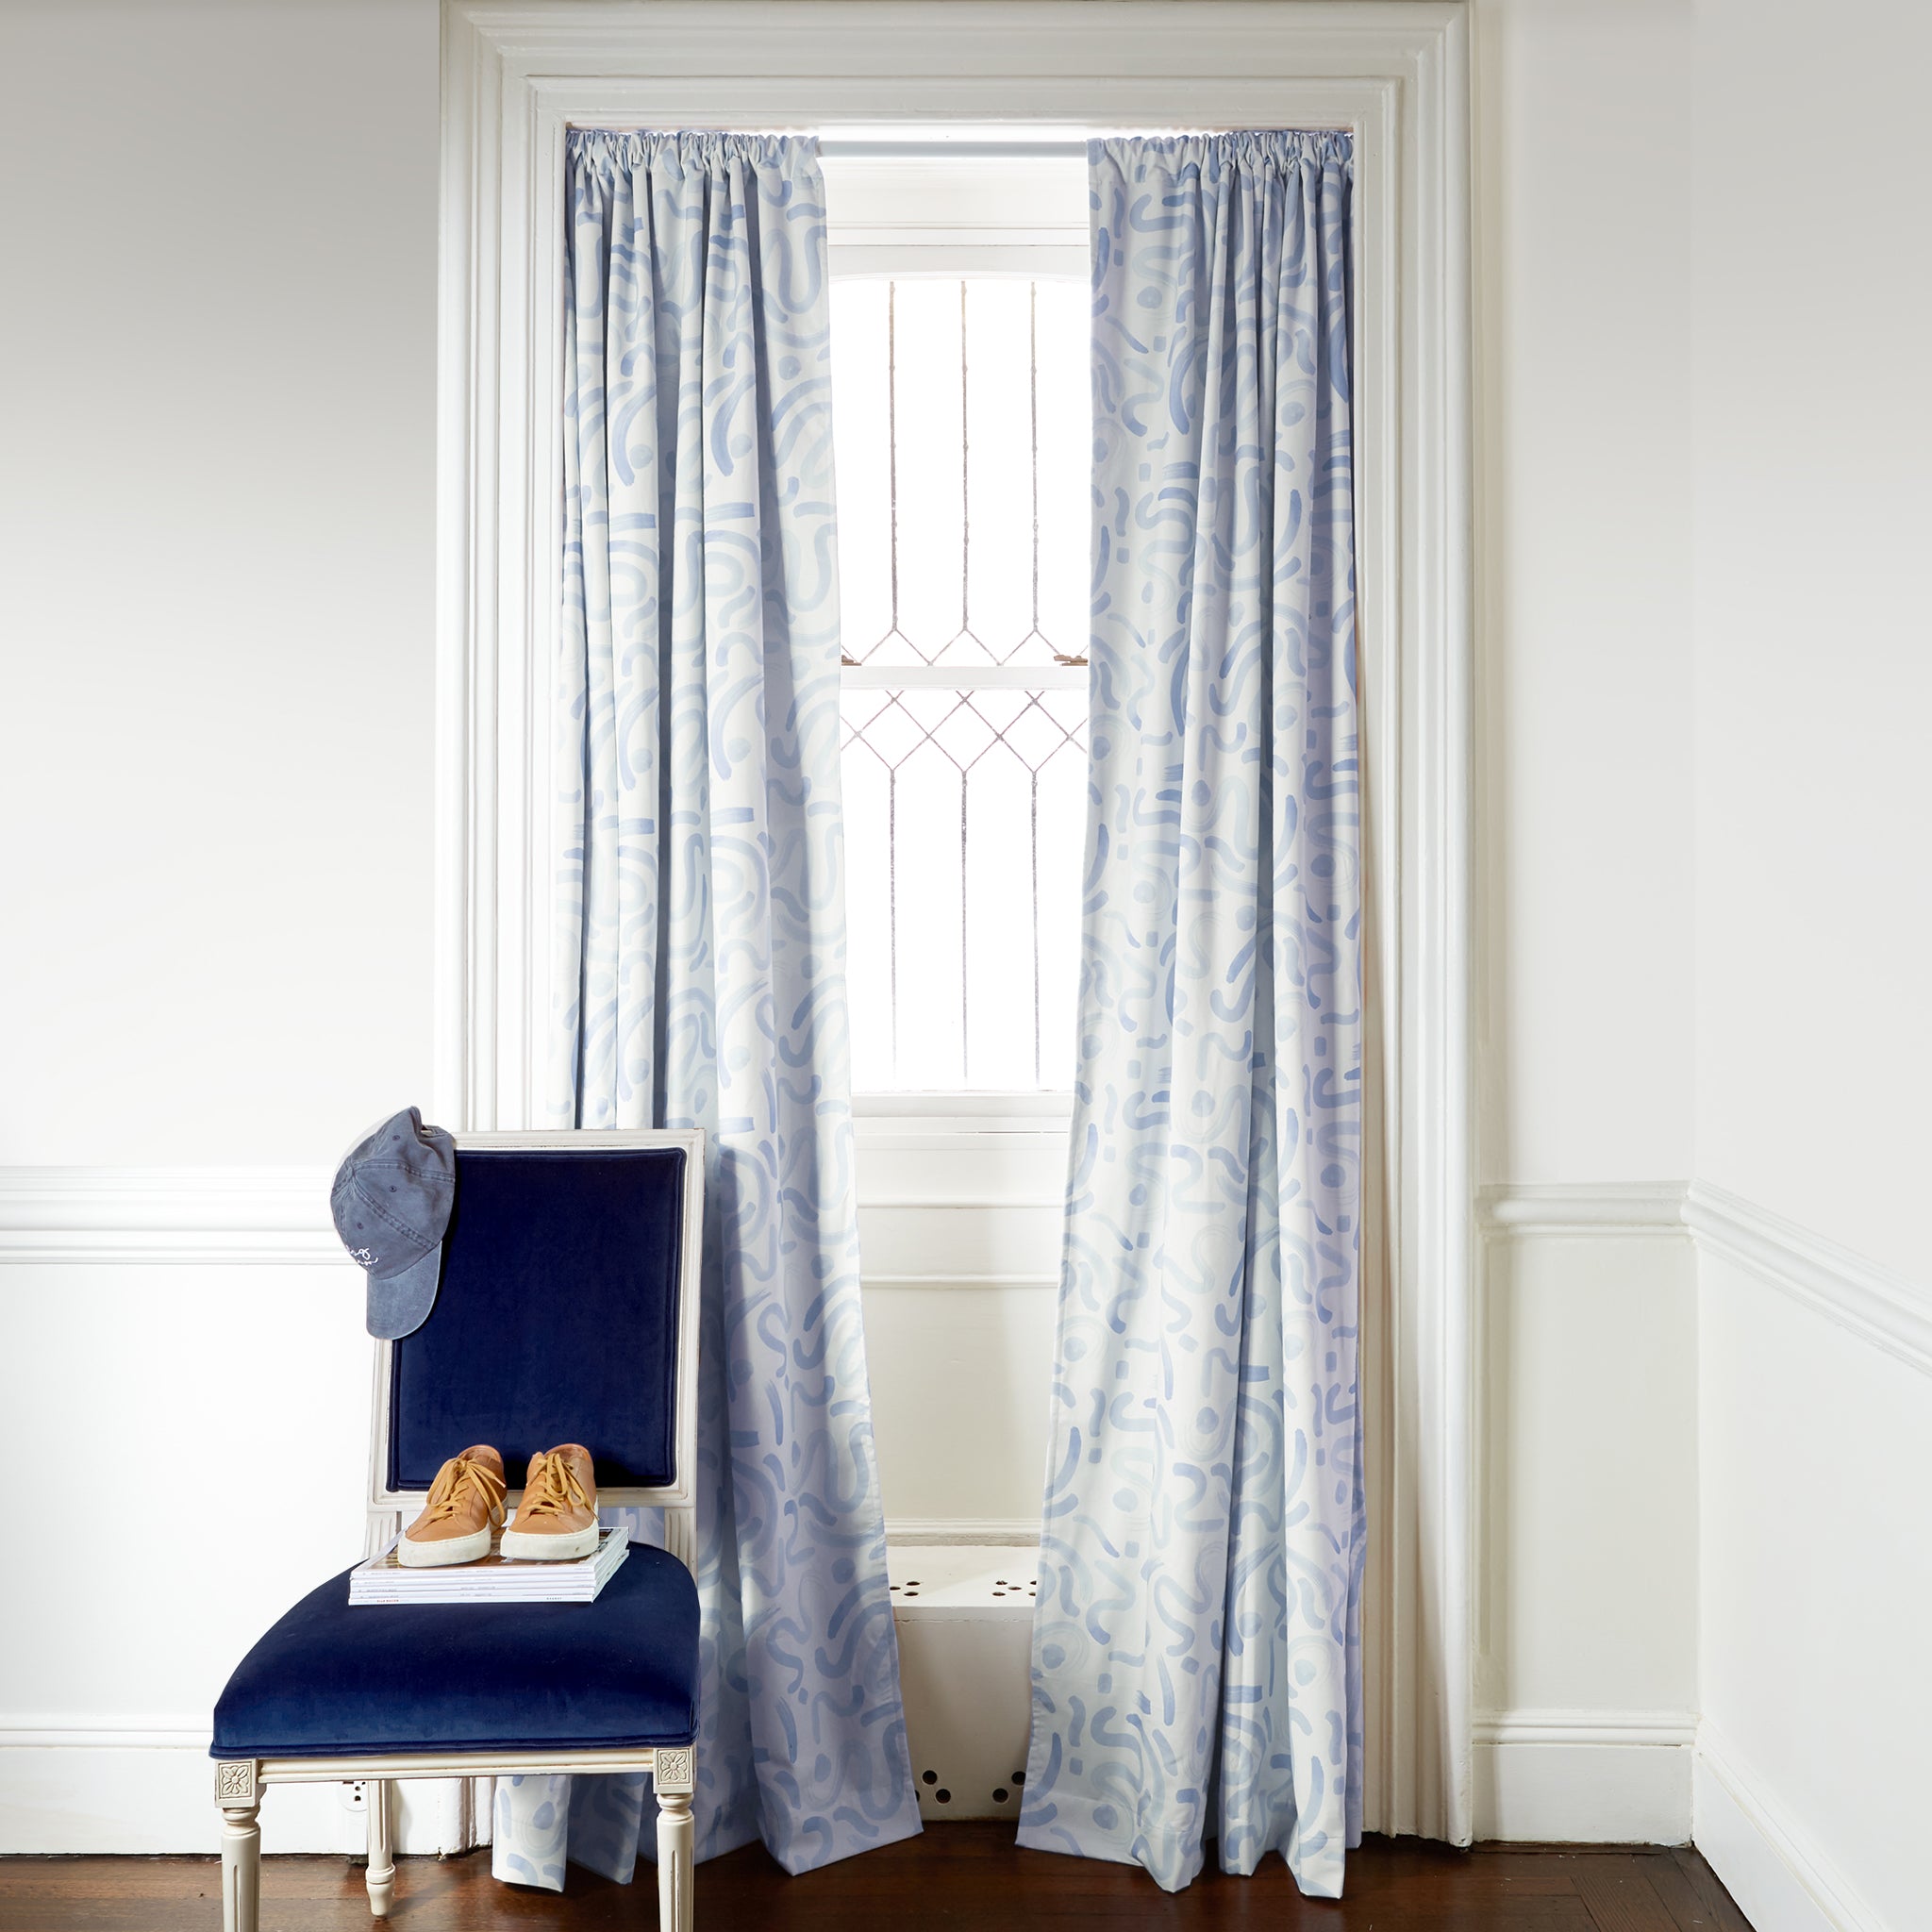 Sky blue abstract custom curtain hanging on window in room with white walls and navy chair